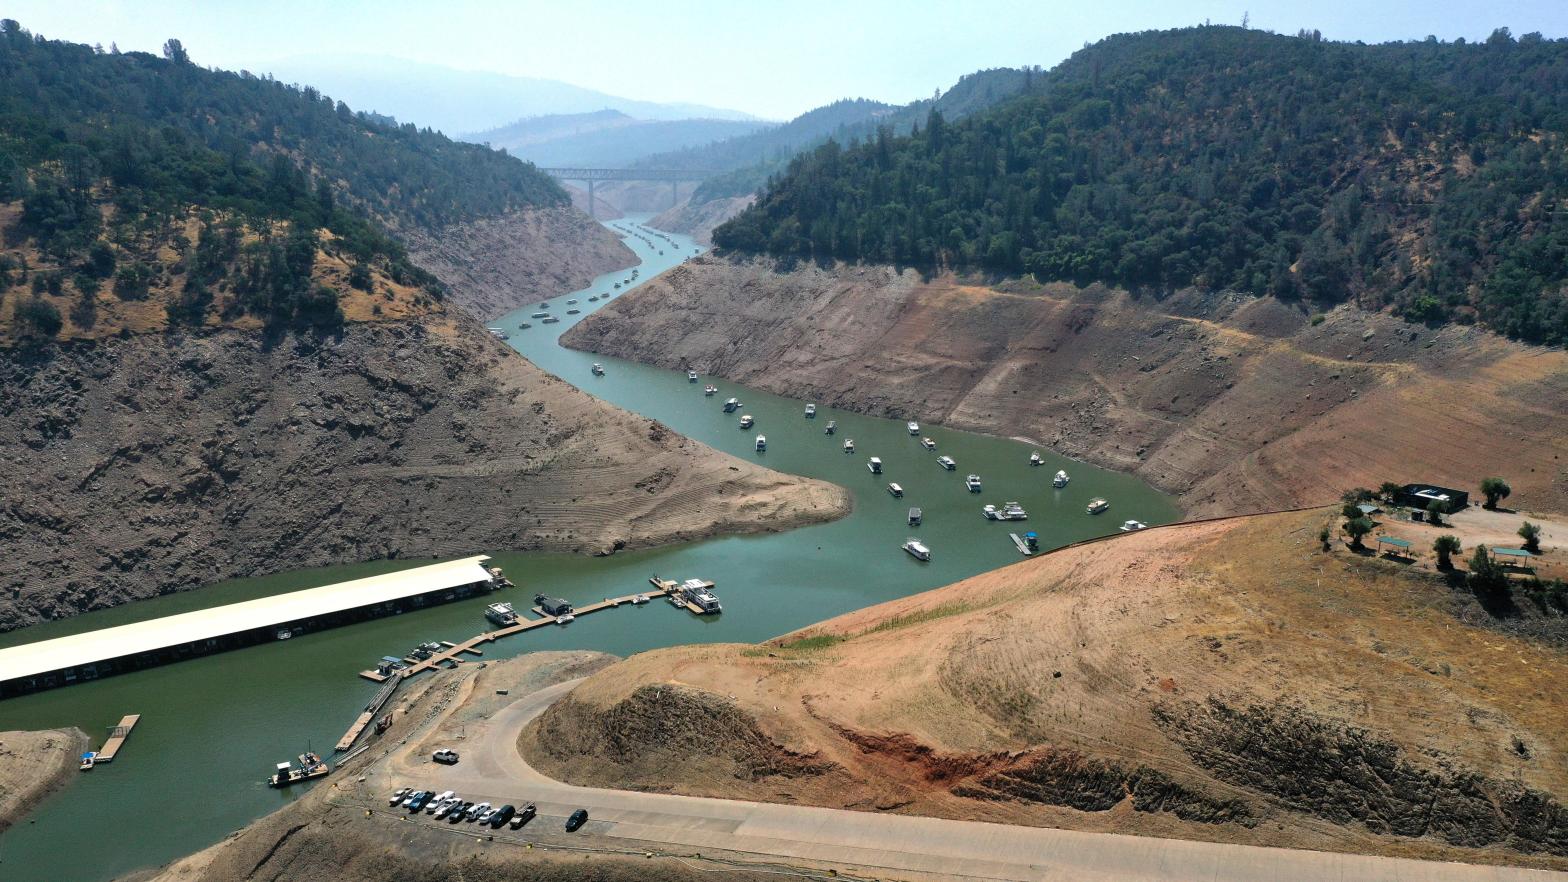 Low water levels at Lime Saddle Marina at Lake Oroville on July 22, 2021 in Paradise, California. (Photo: Justin Sullivan, Getty Images)